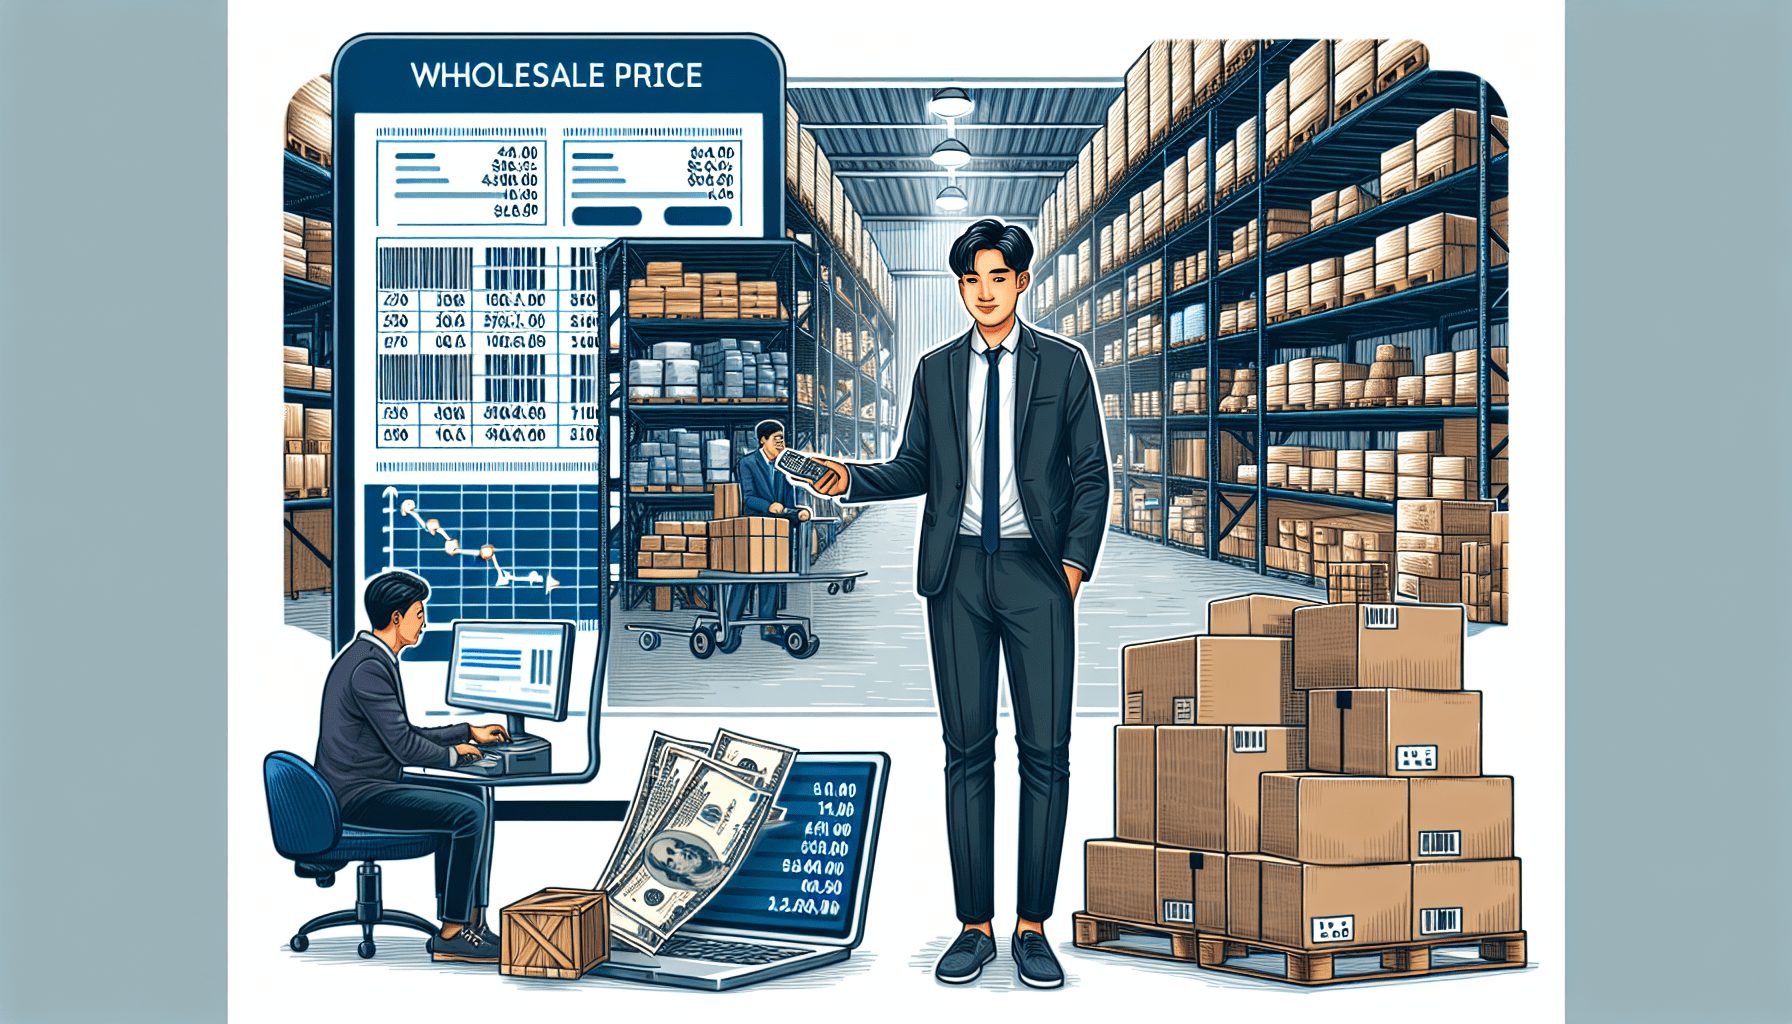 Product prices: 3 effective steps to set wholesale pricing